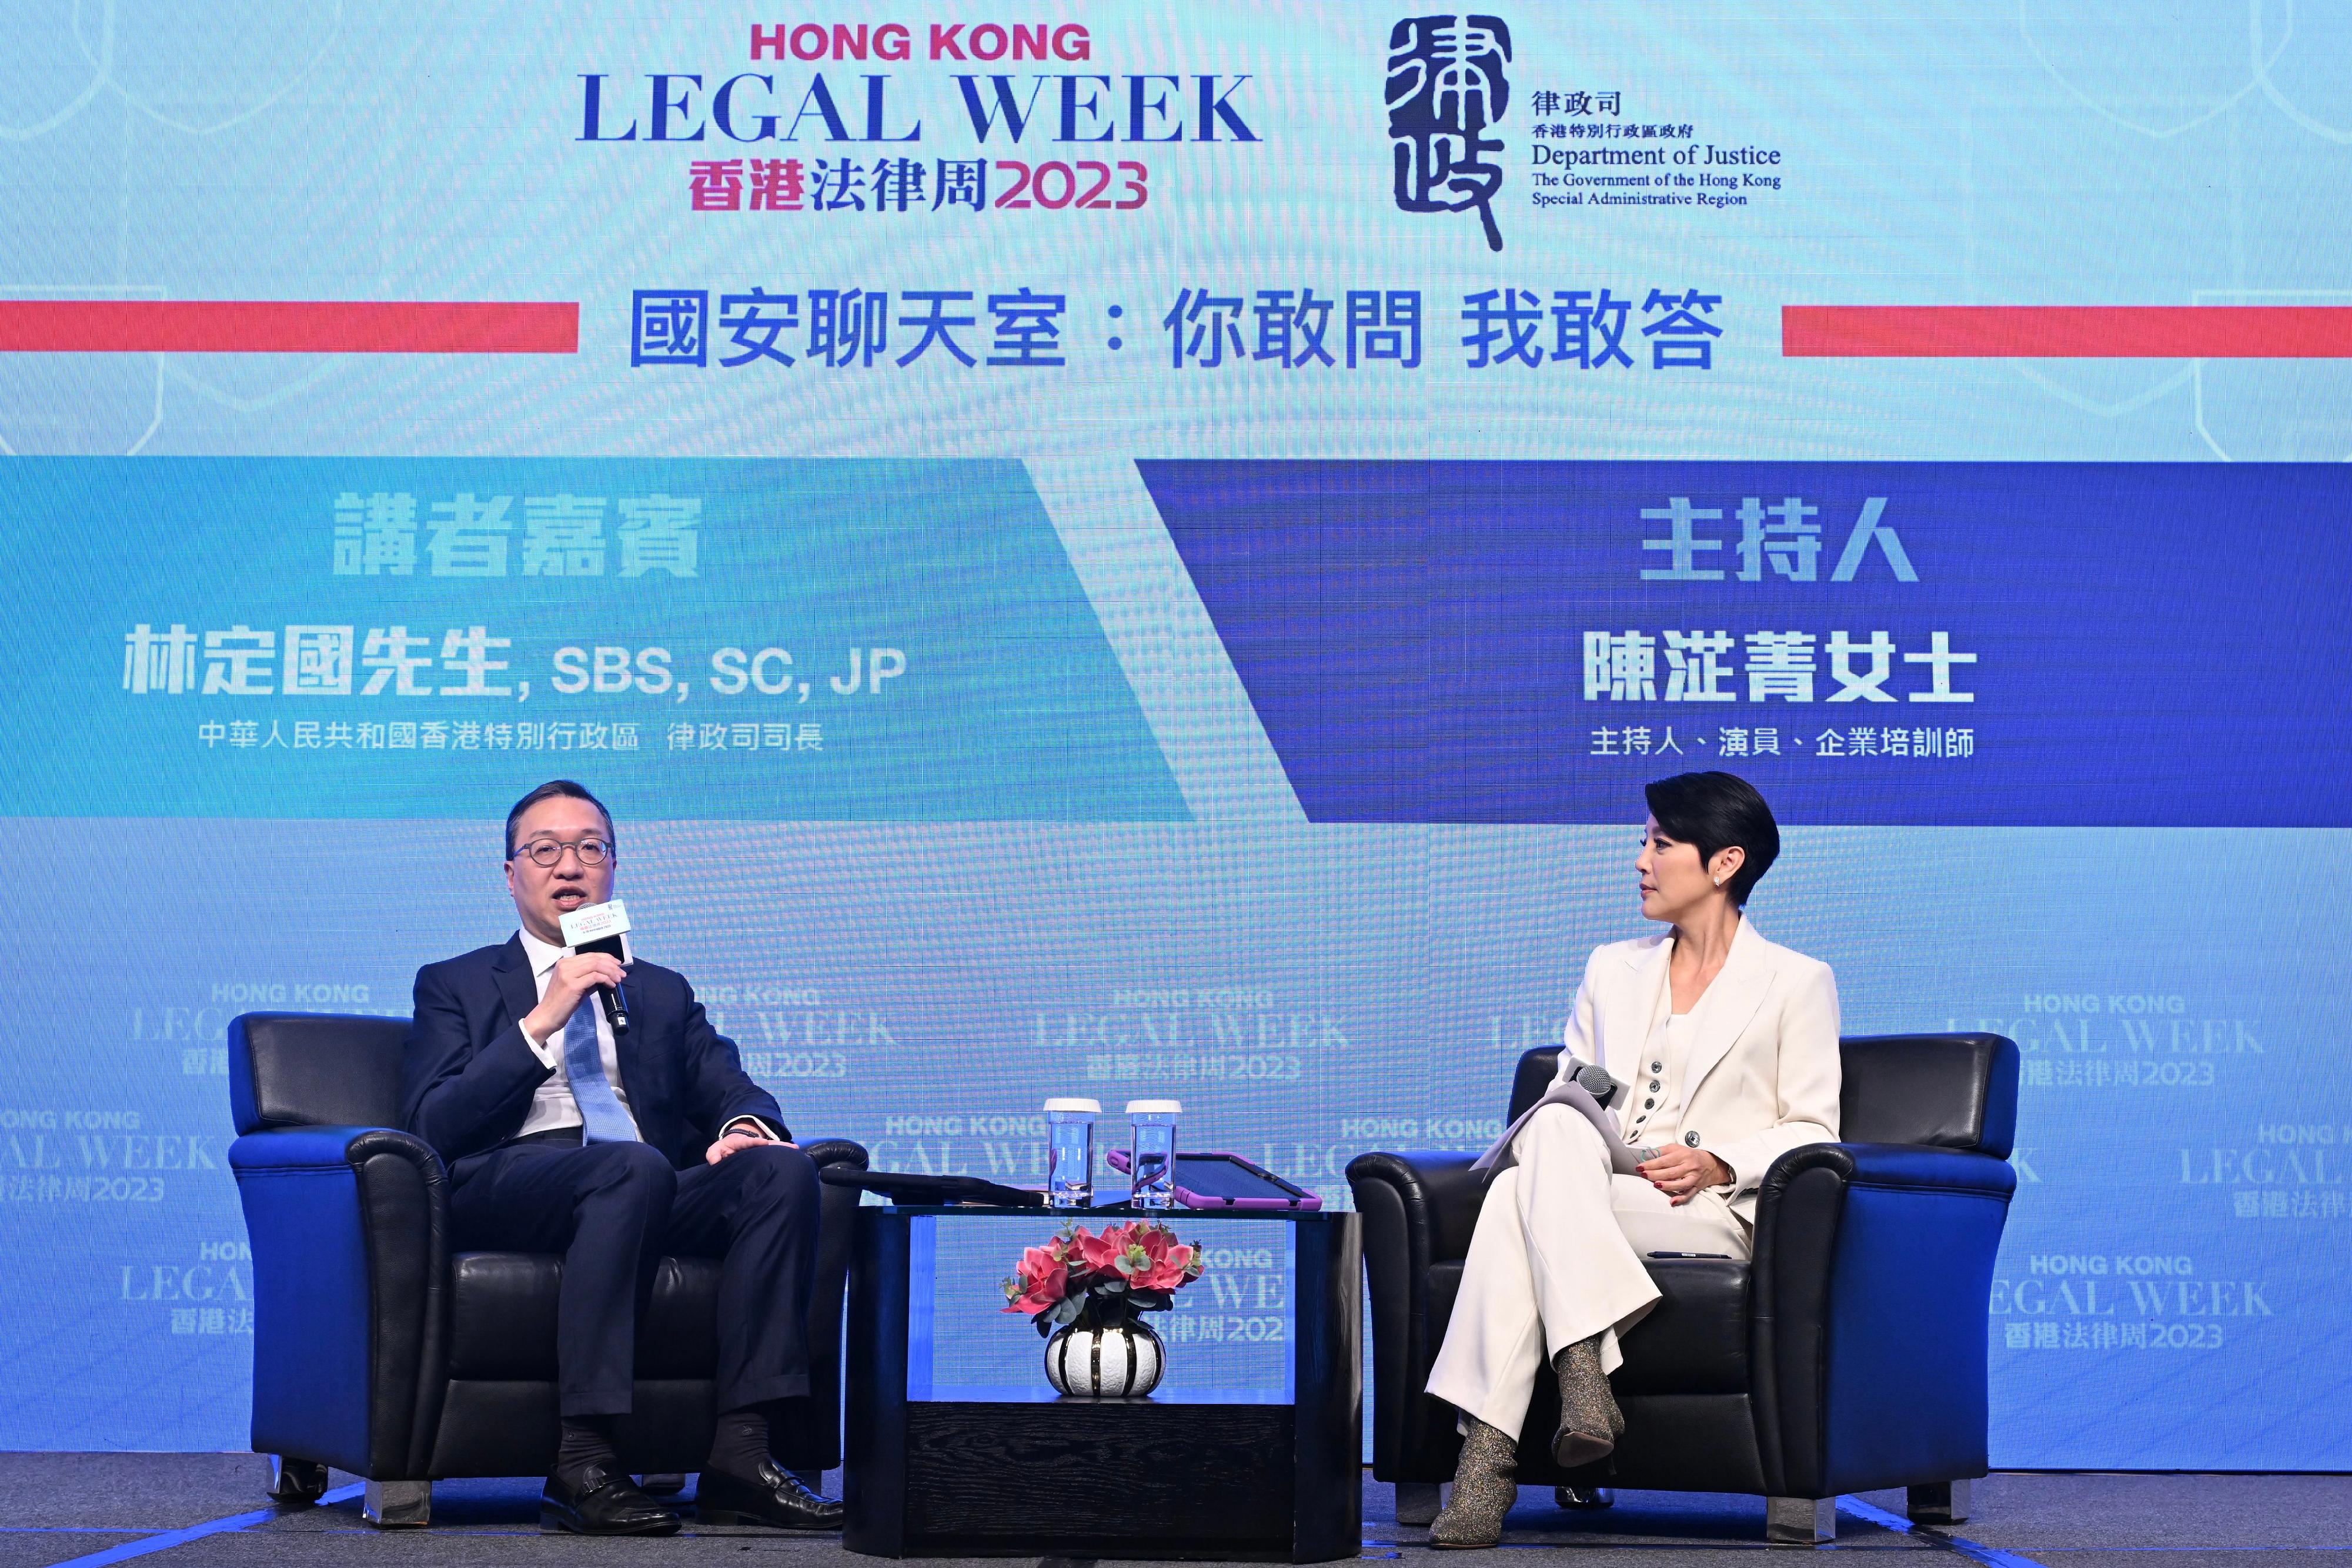 Hong Kong Legal Week 2023, an annual flagship event of the legal sector and the Department of Justice, successfully concluded today (November 10). Photo shows the Secretary for Justice, Mr Paul Lam, SC (left), and emcee Astrid Chan (right) at the National Security Chatroom: "You ask, I answer" at the Rule of Law for the Future.